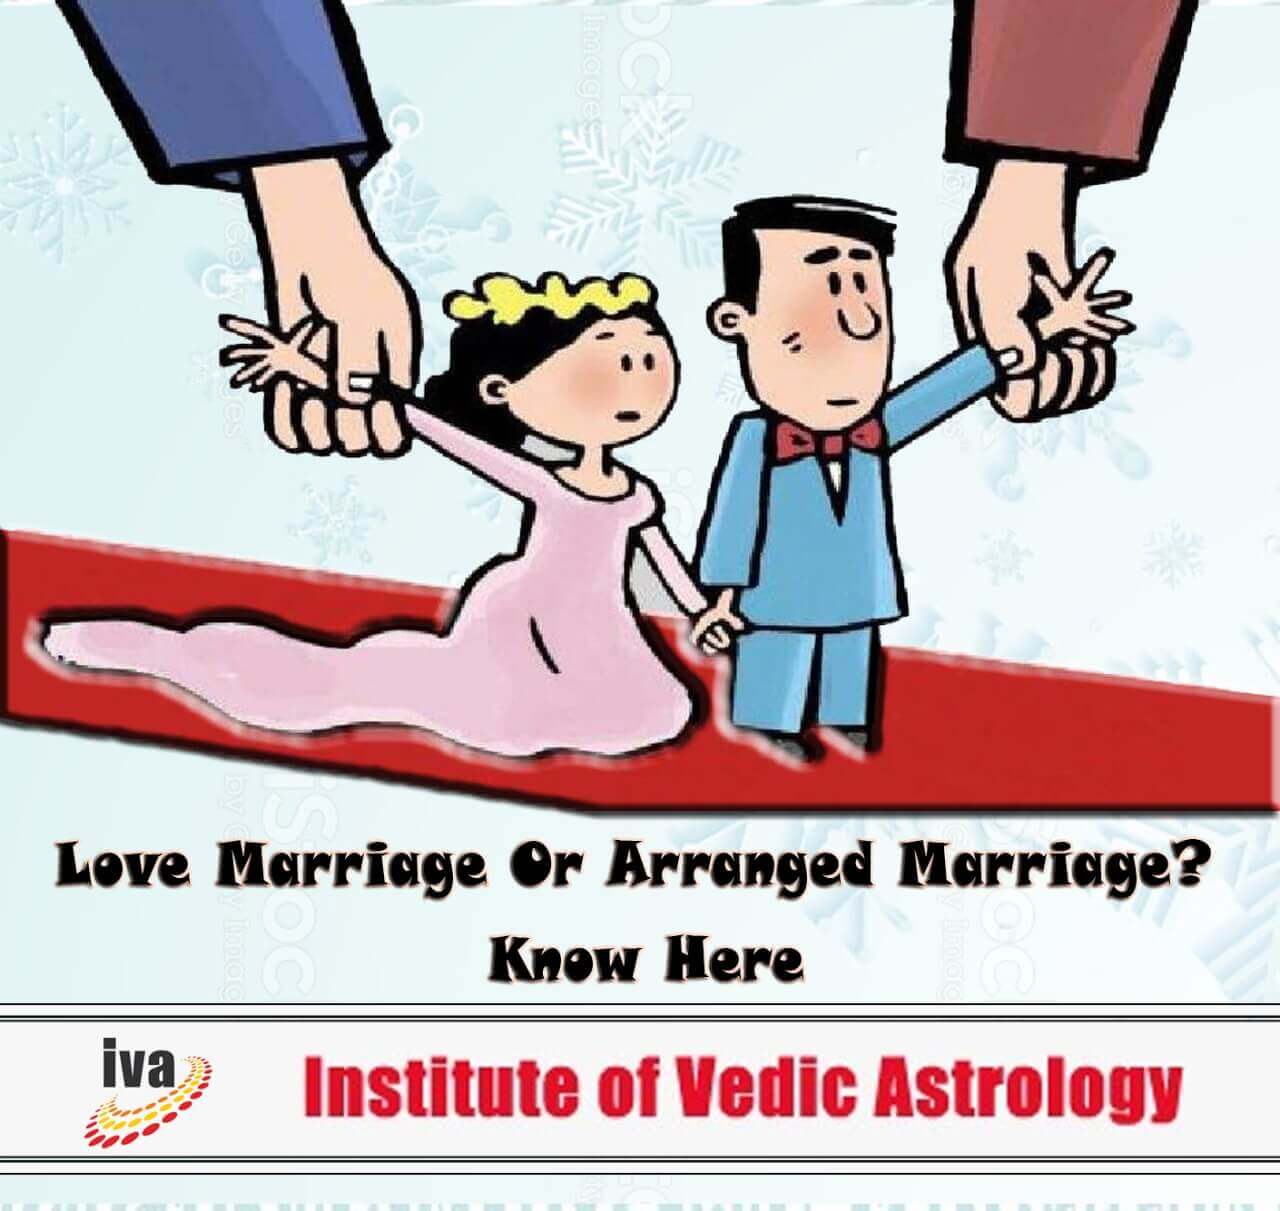 Love Marriage or Arranged Marriage? Know here